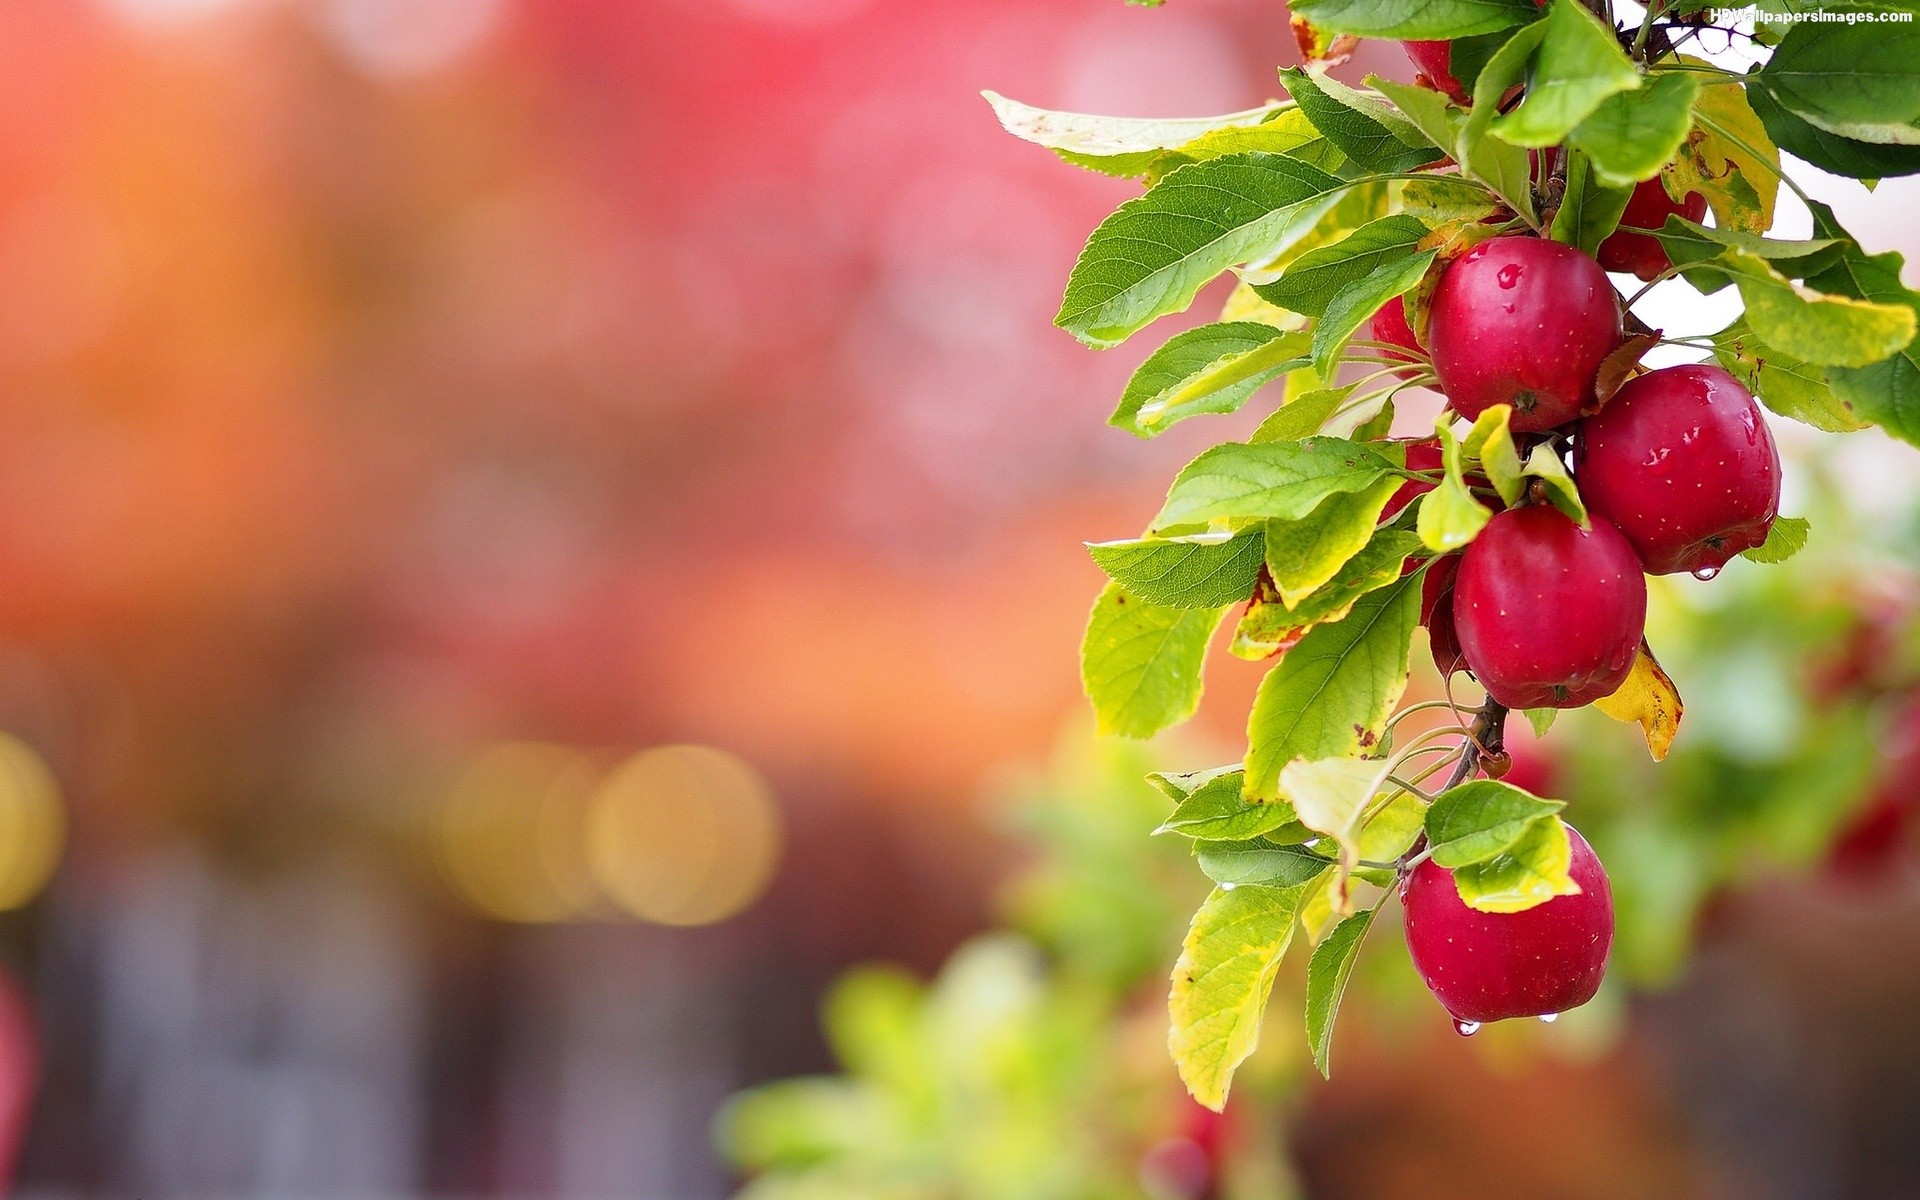 Image Wallpaper Of Apple Tree In HD Quality B Scb